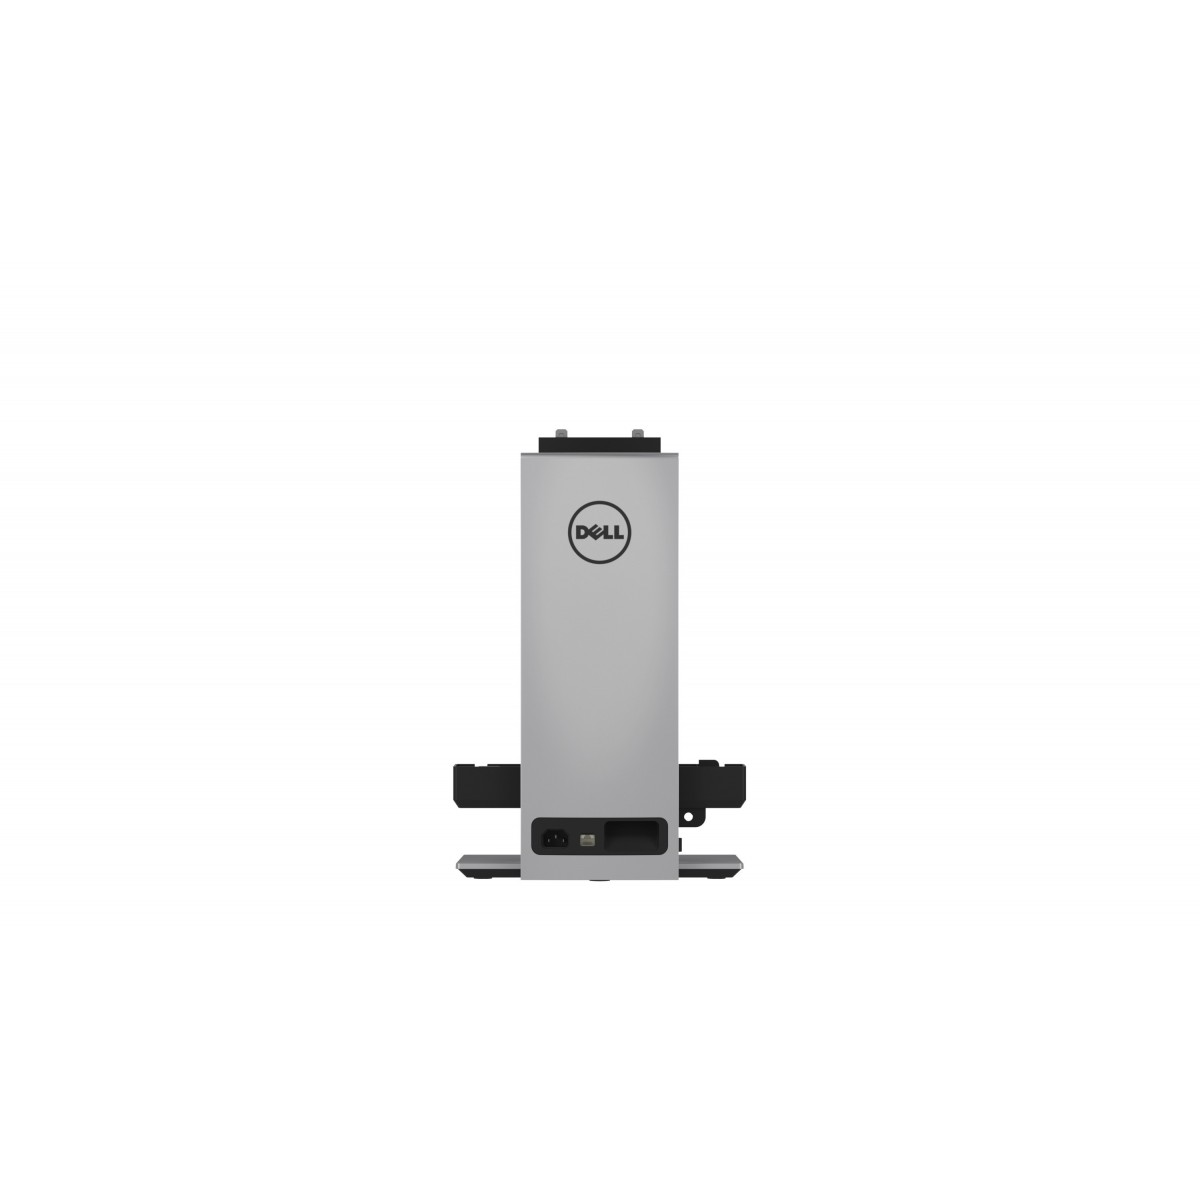 Dell OSS21 - 68.6 cm (27) - 5.7 kg - Height adjustment - Silver